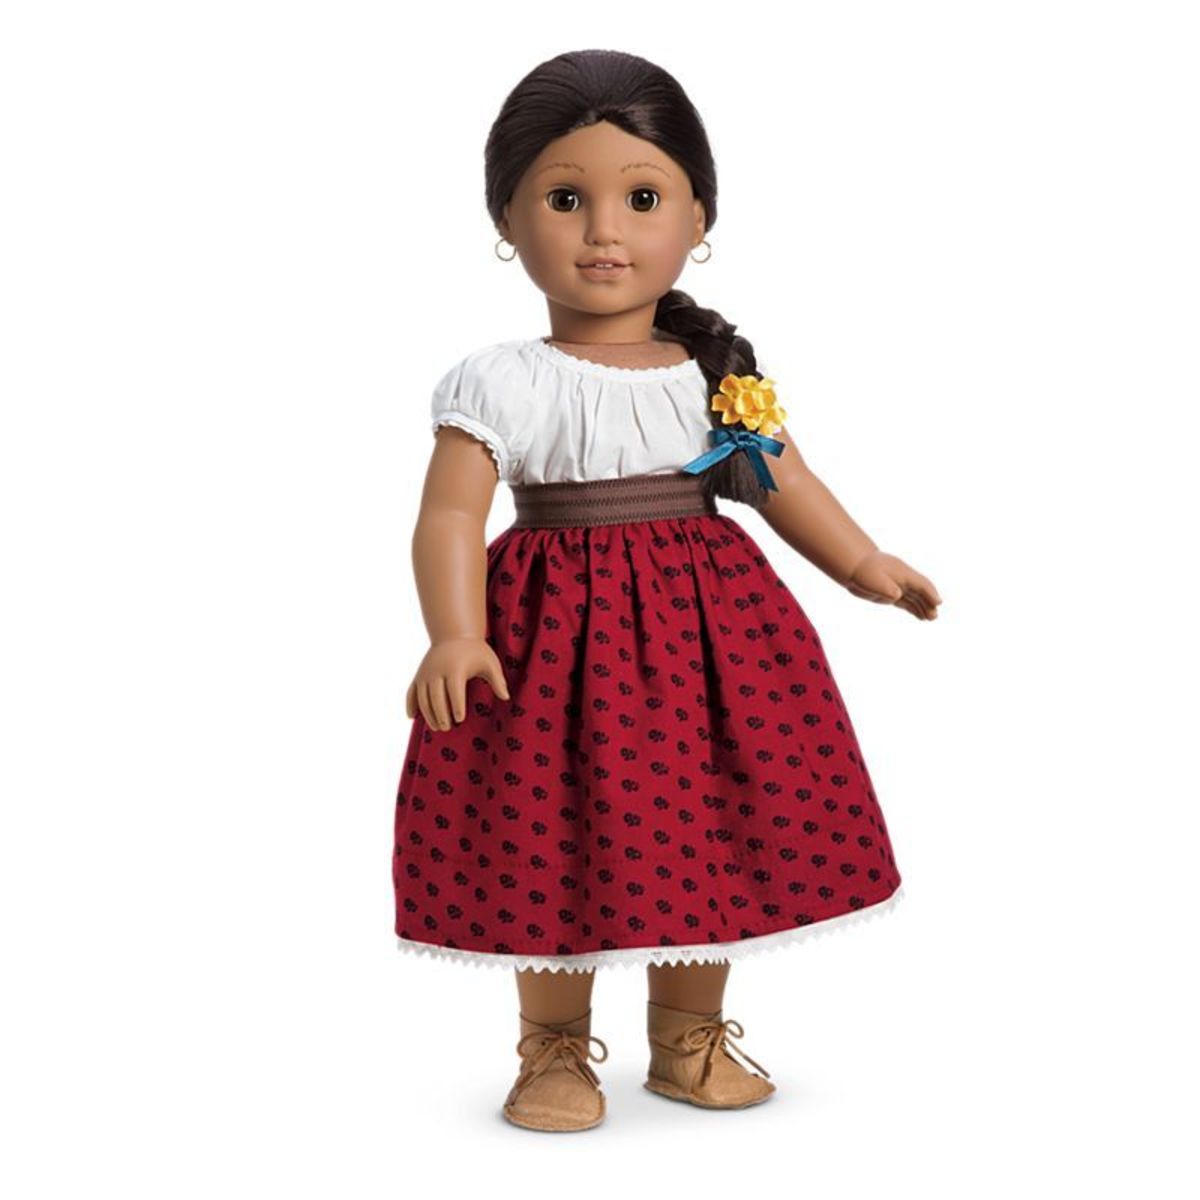 Josefinas Clothing And Accessories An American Girl Collectors Guide